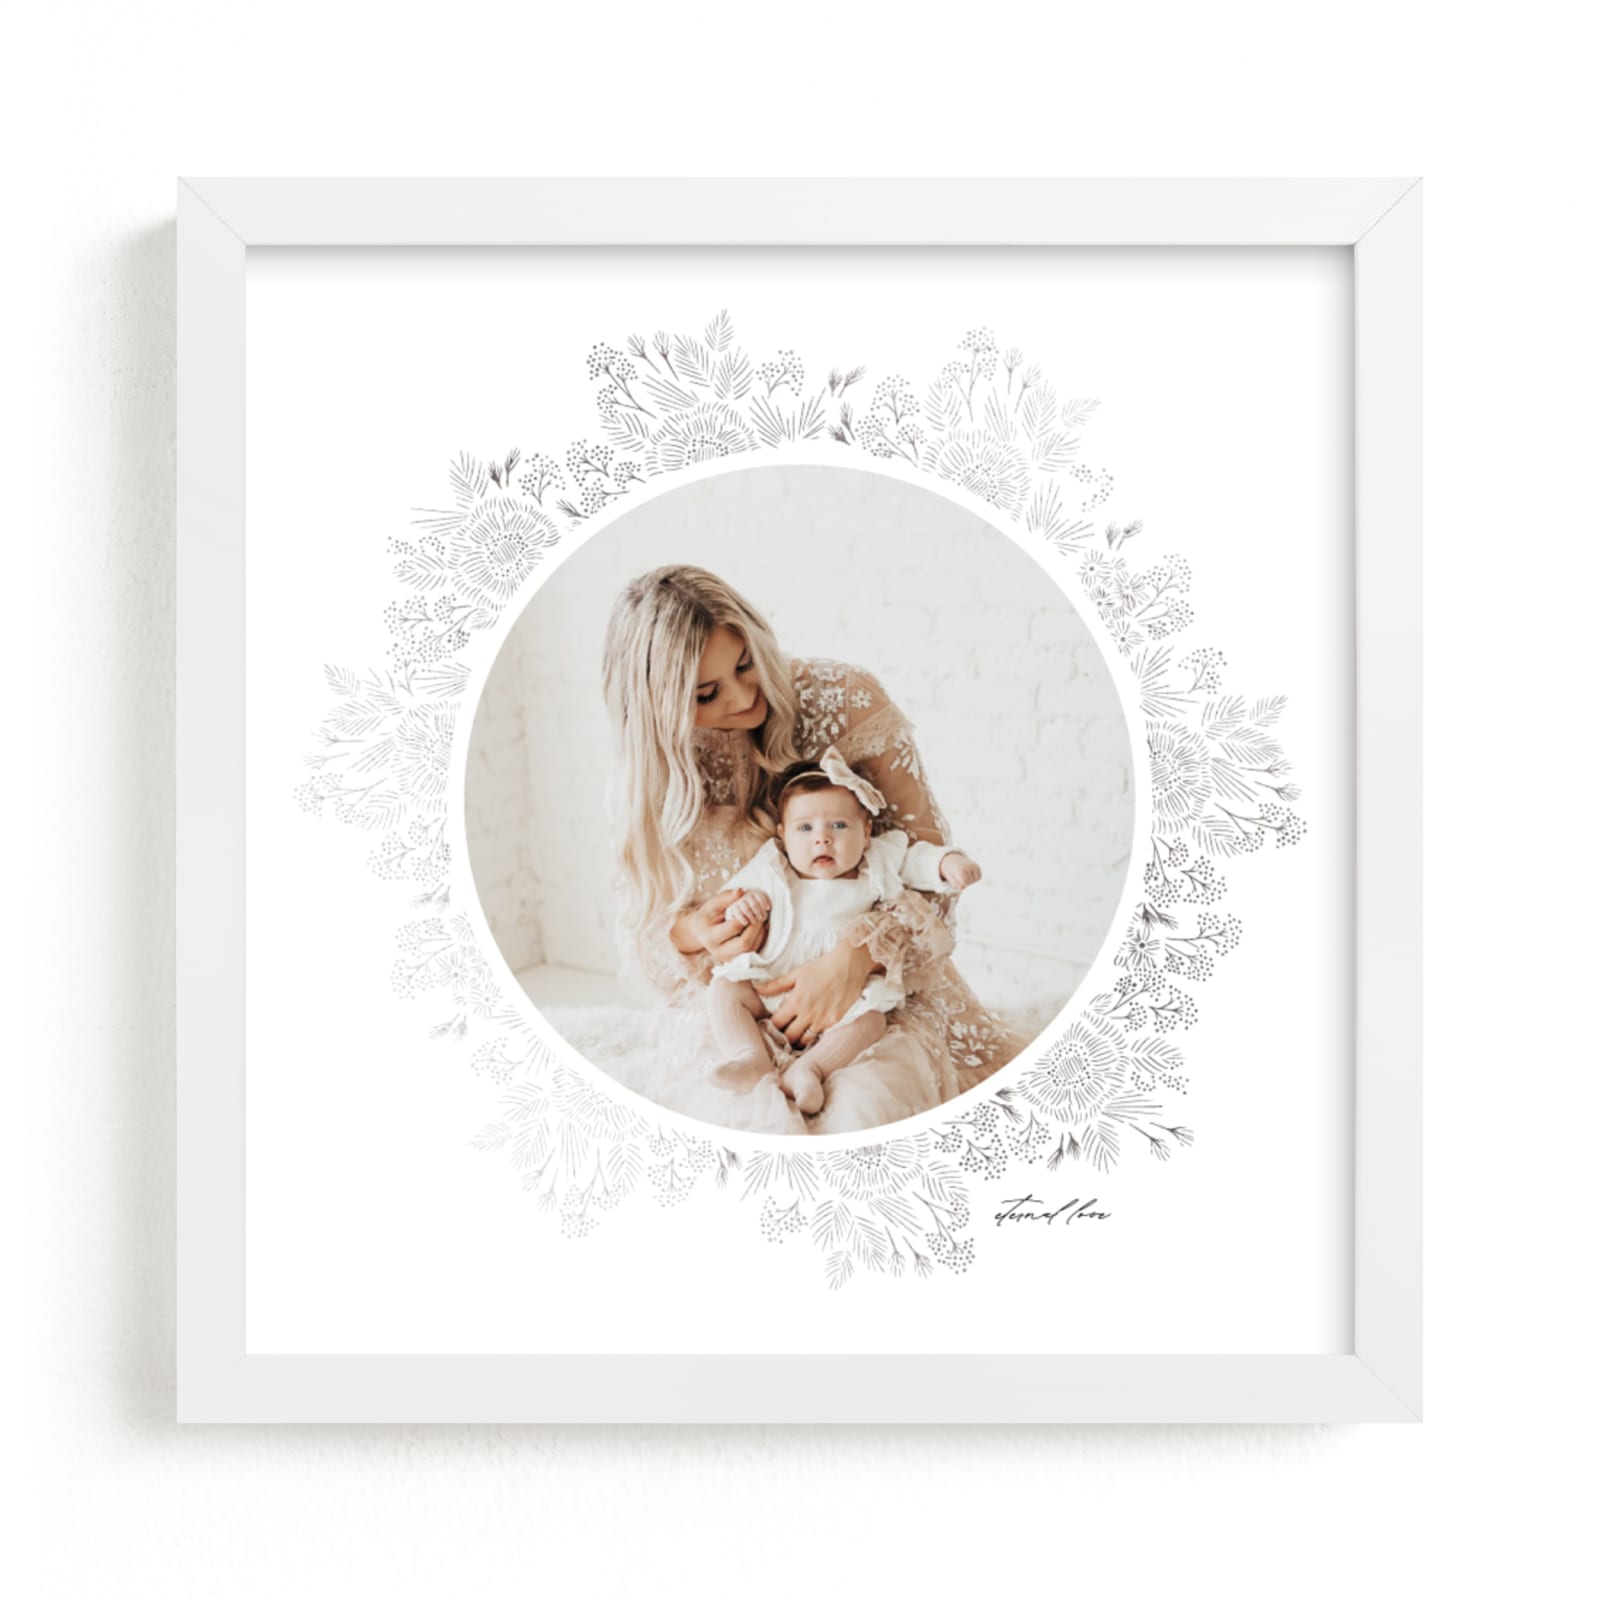 This is a silver, white foil stamped photo art by Tamara Hilje called Gilded Blooms.